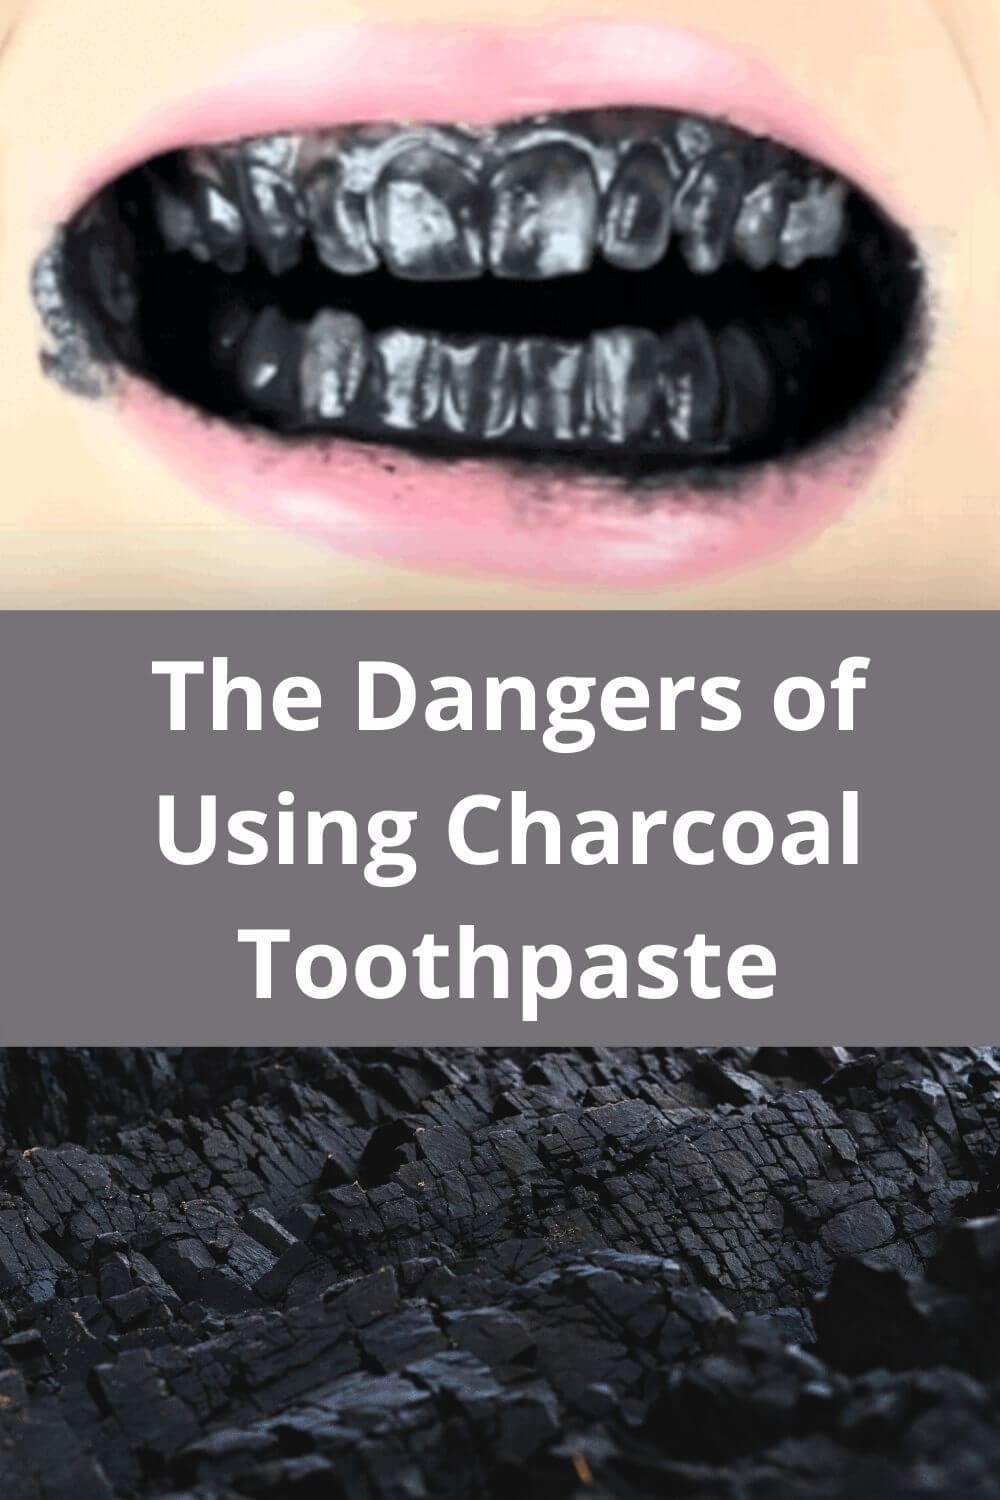 The dangersof using charcoal toothpaste